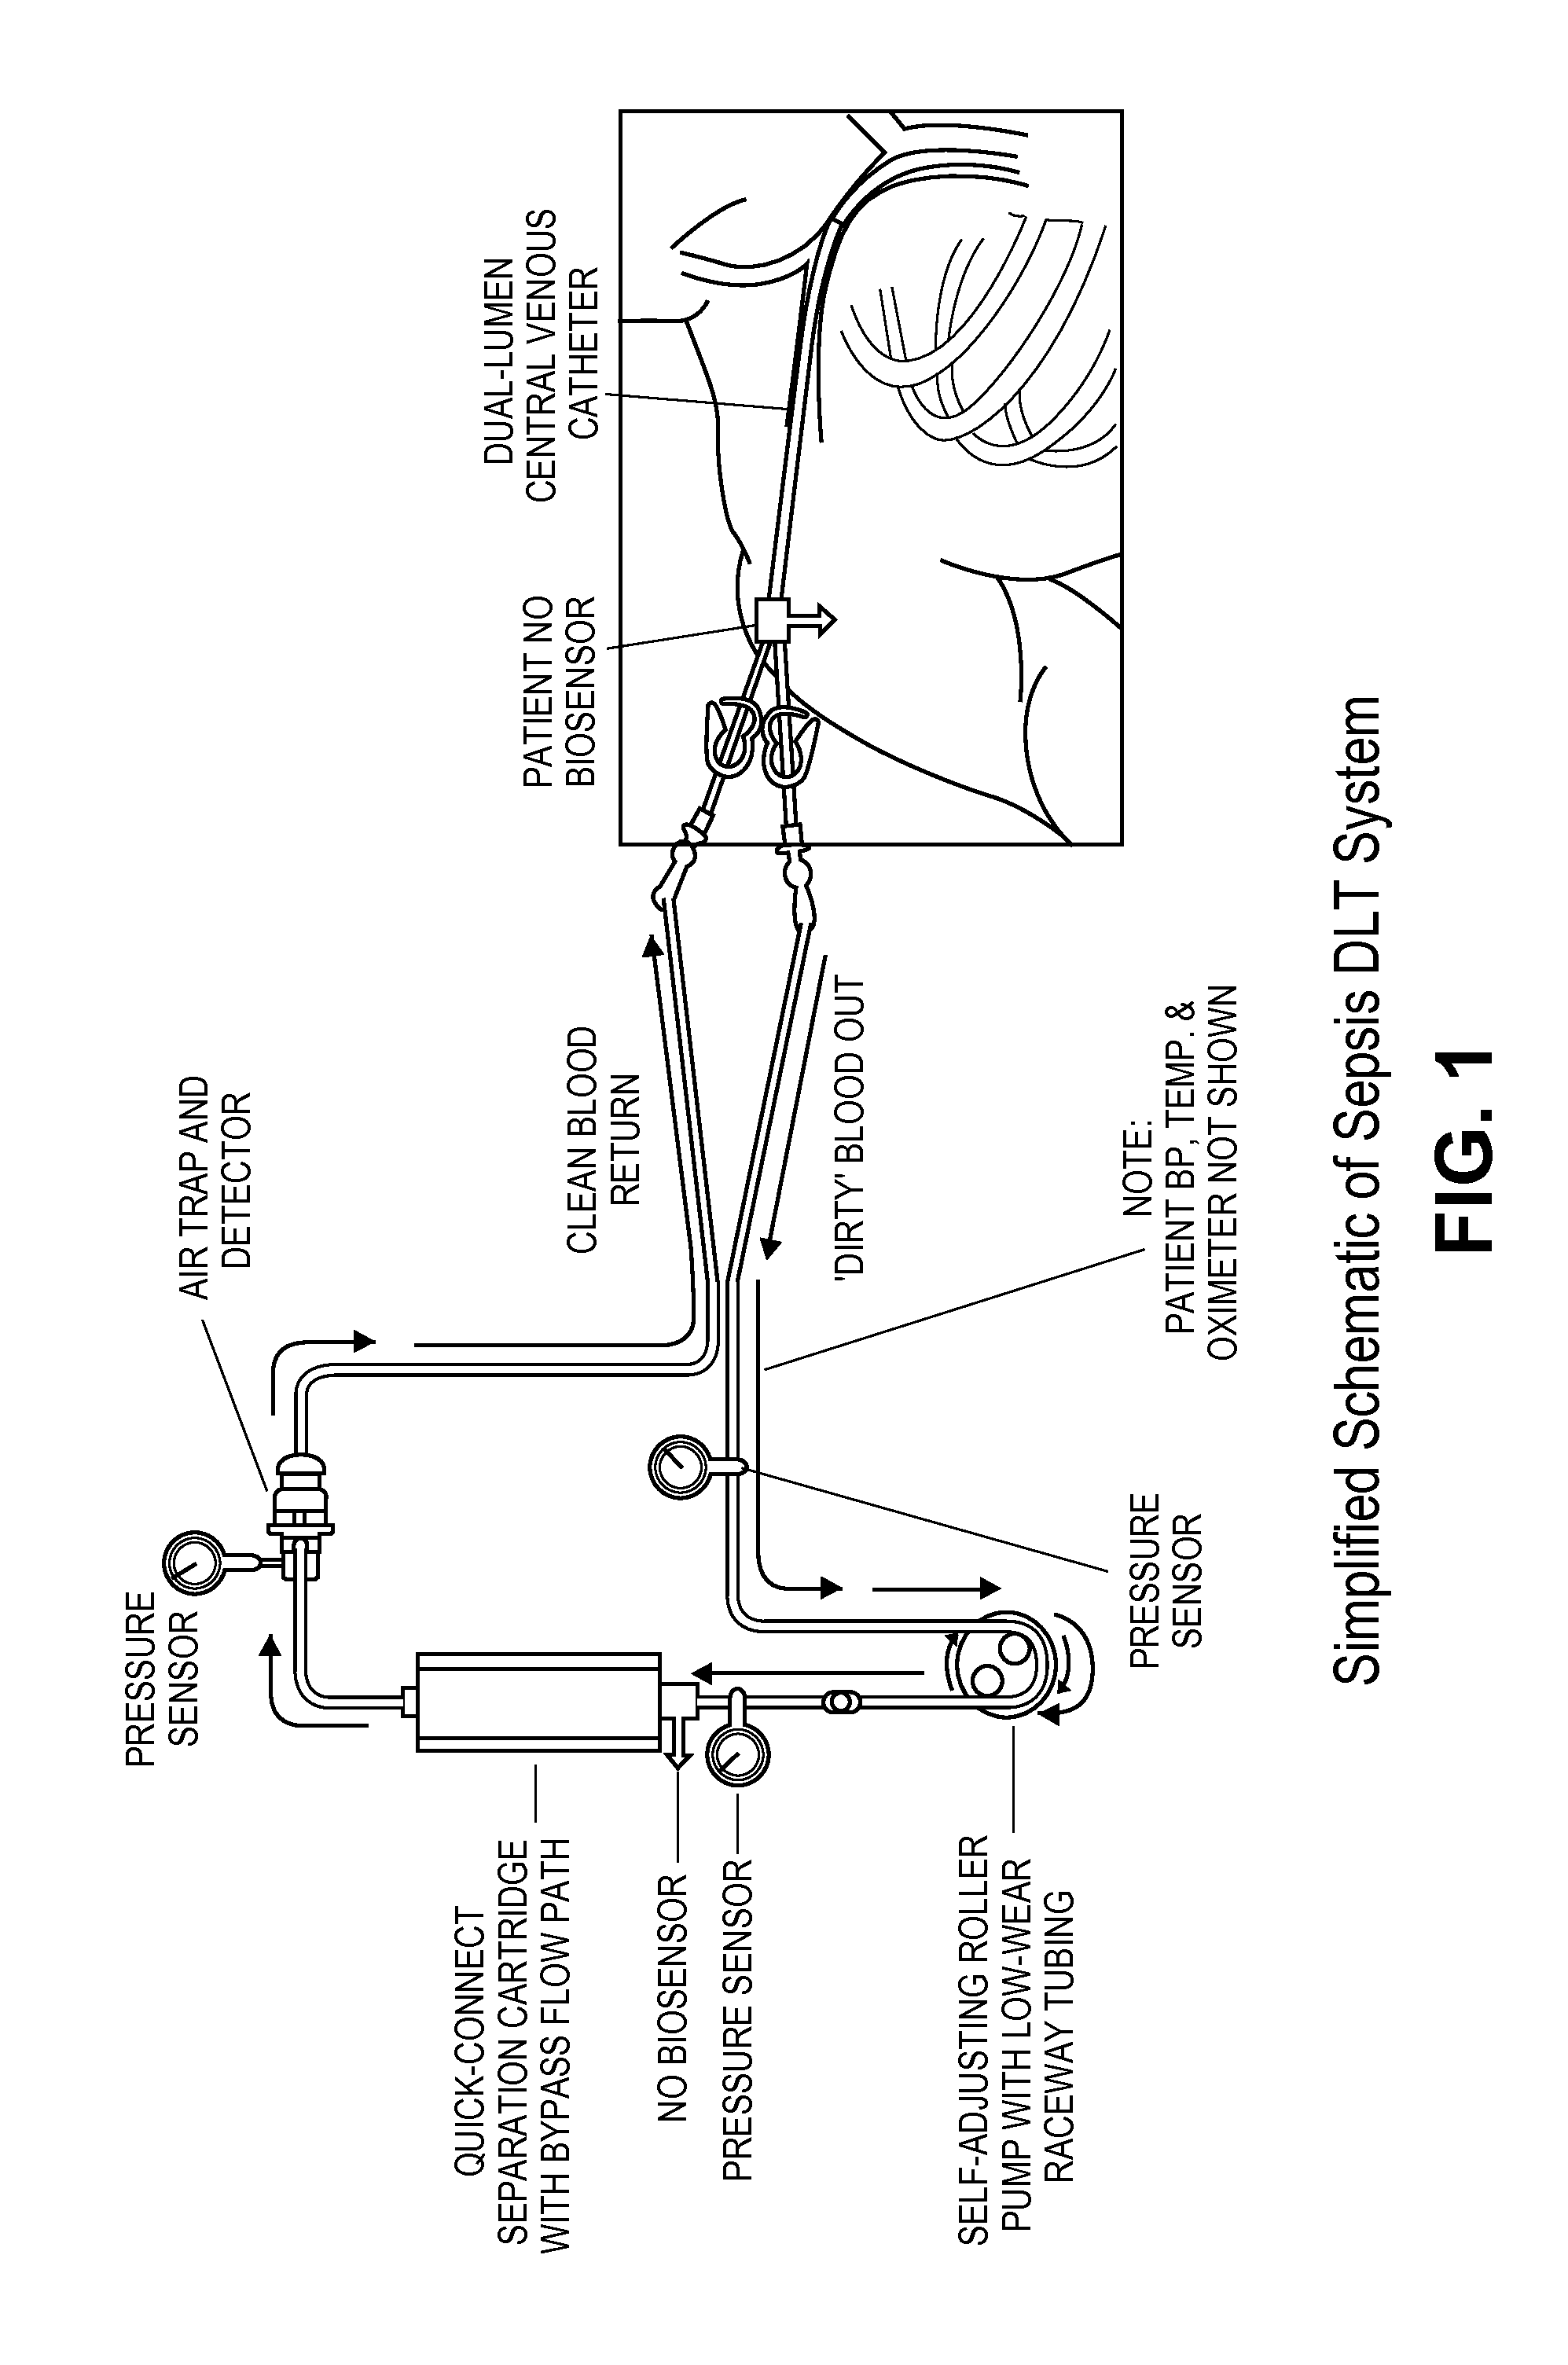 Device and method for removal of blood-borne pathogens, toxins and inflammatory cytokines